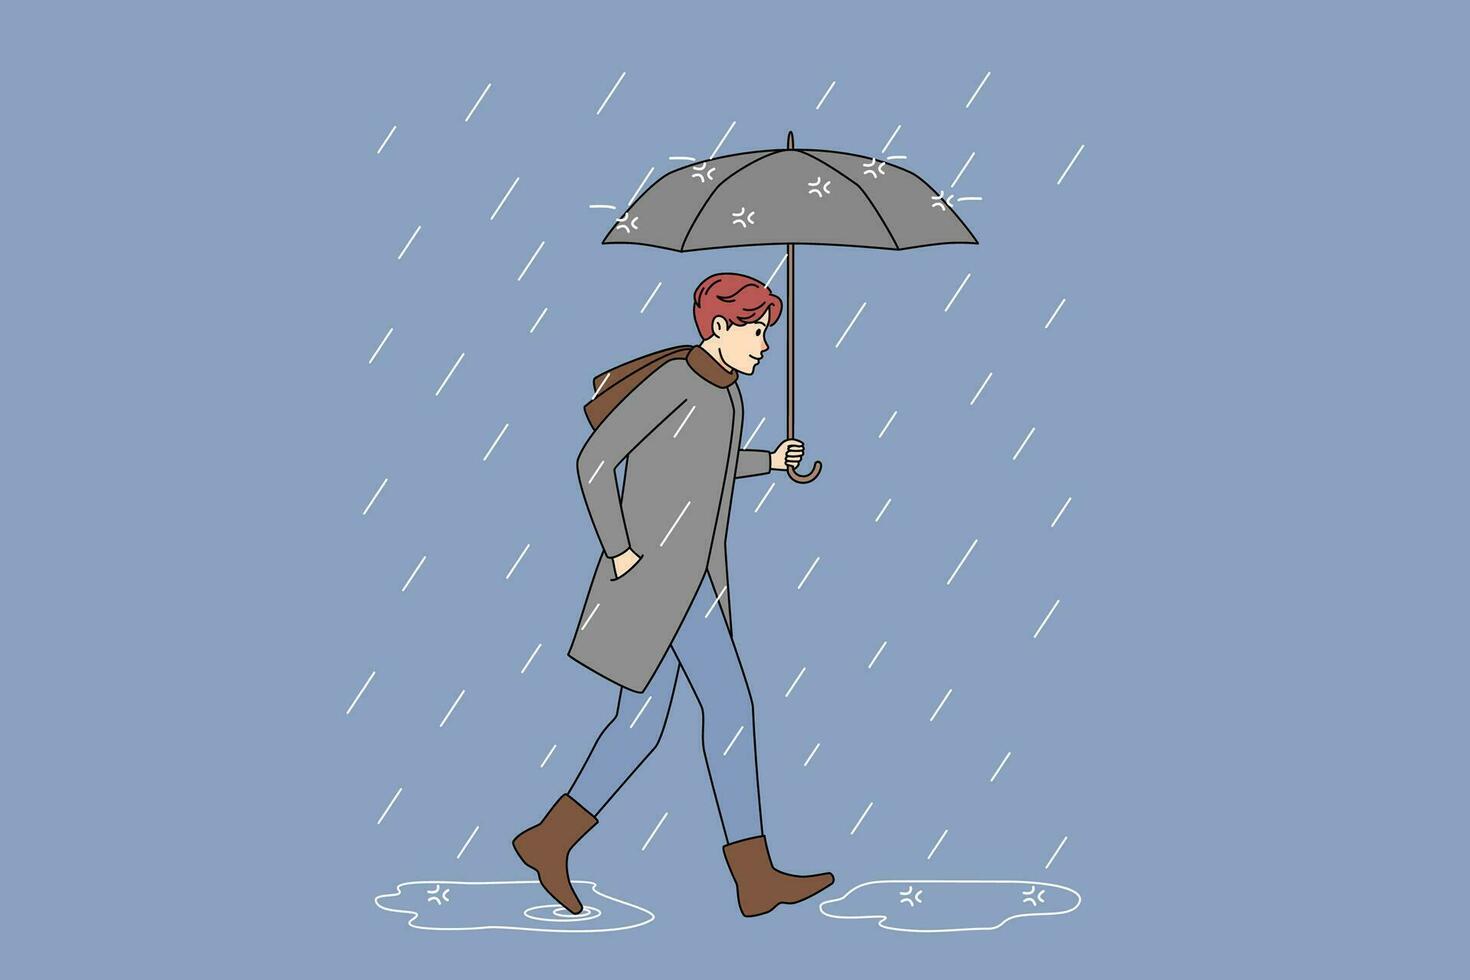 Man in boots and outerwear walking in rain under umbrella. Guy out on rainy day. Weather and climate change. Vector illustration.